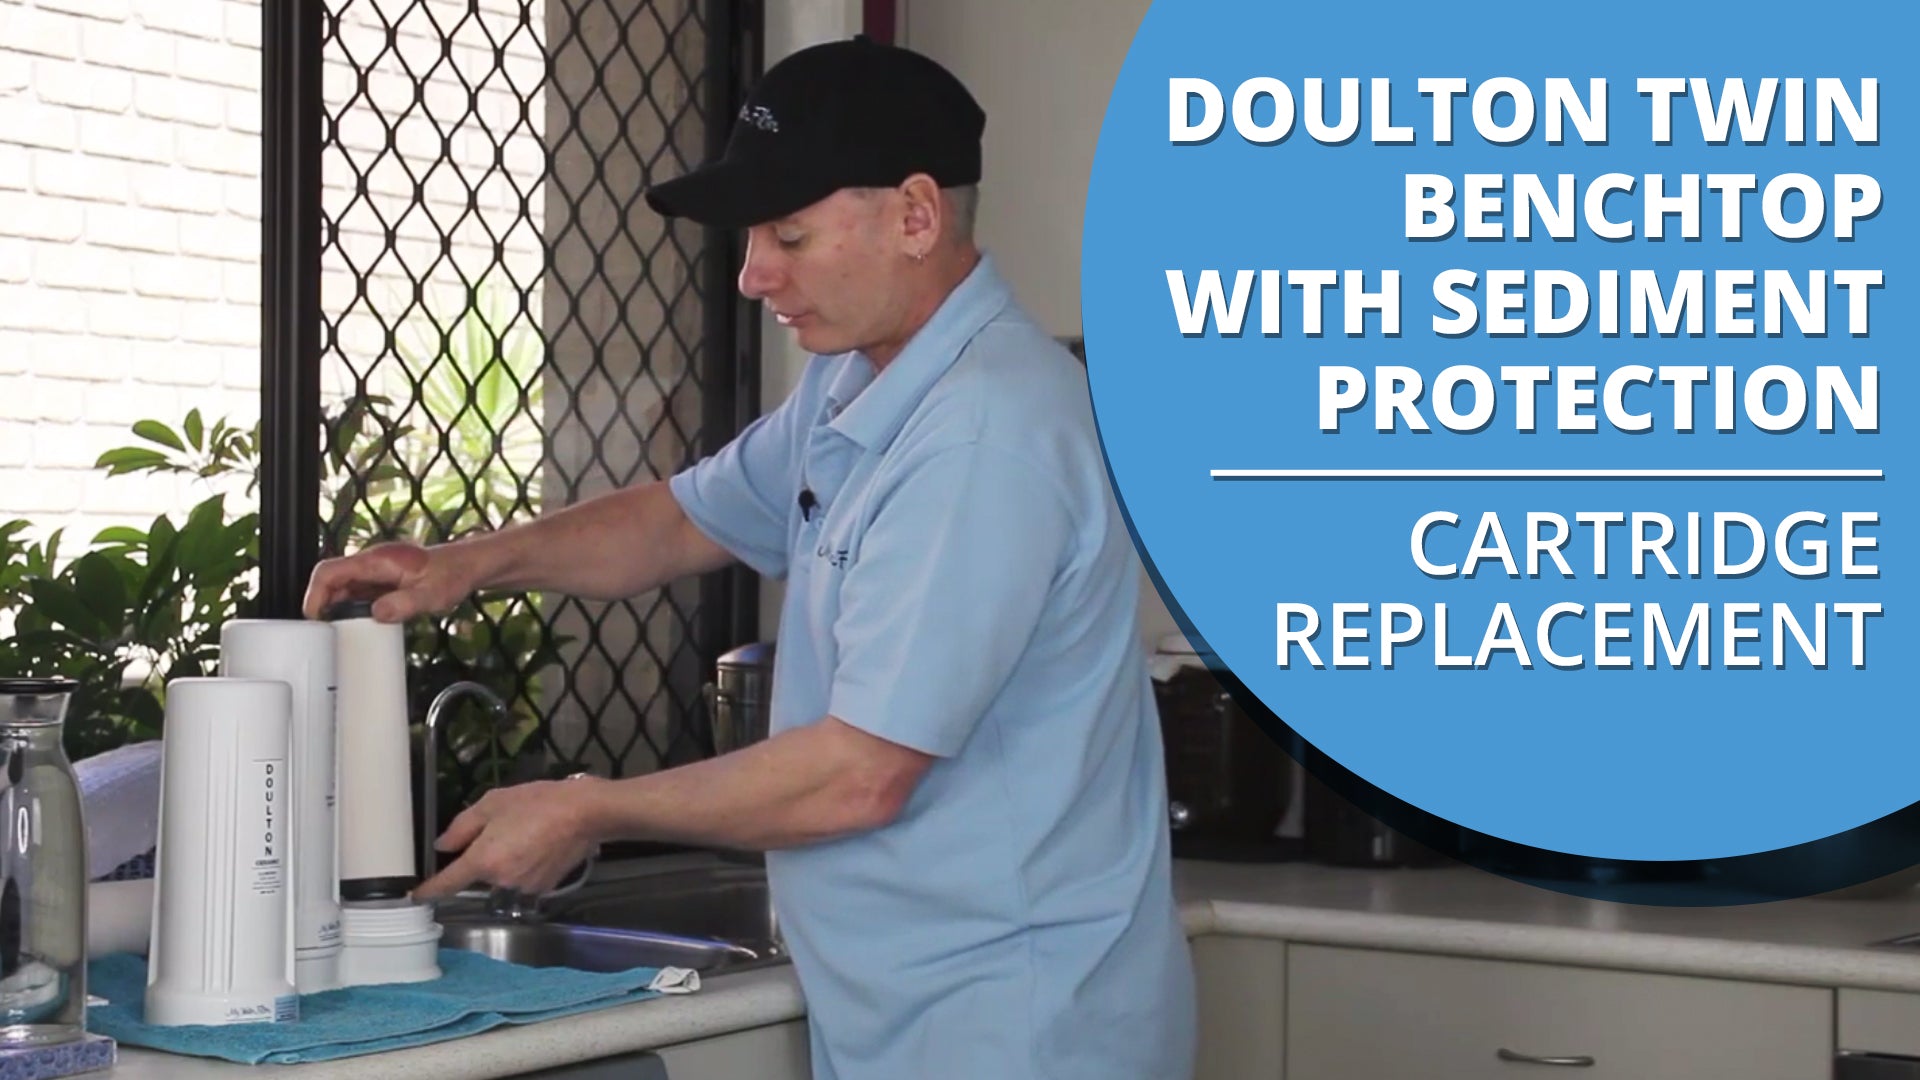 [VIDEO] How to change the cartridges in your Doulton Ultracarb Twin Benchtop Filter w/ Sediment Protection